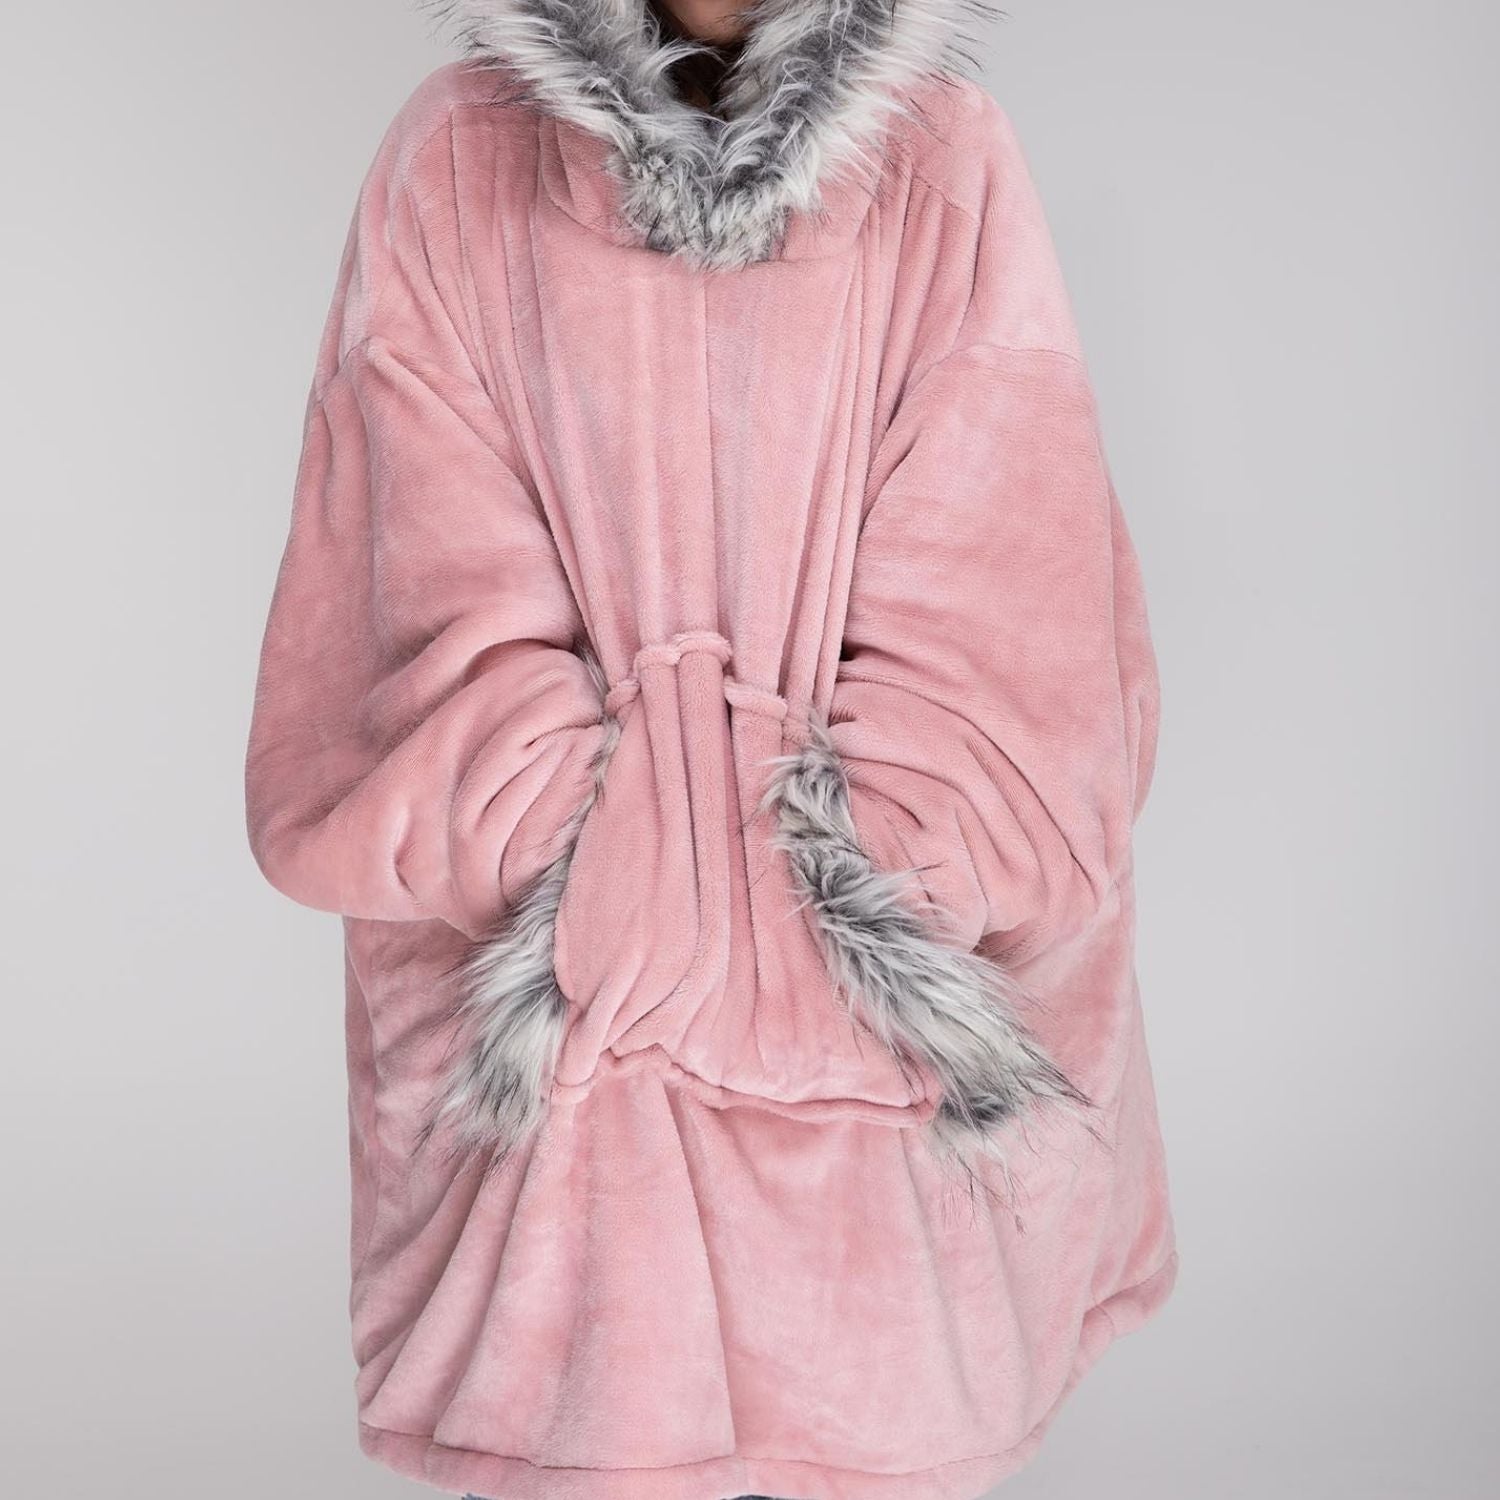 The Home Bedroom Fur Trim Cosy Robe - Pink 1 Shaws Department Stores